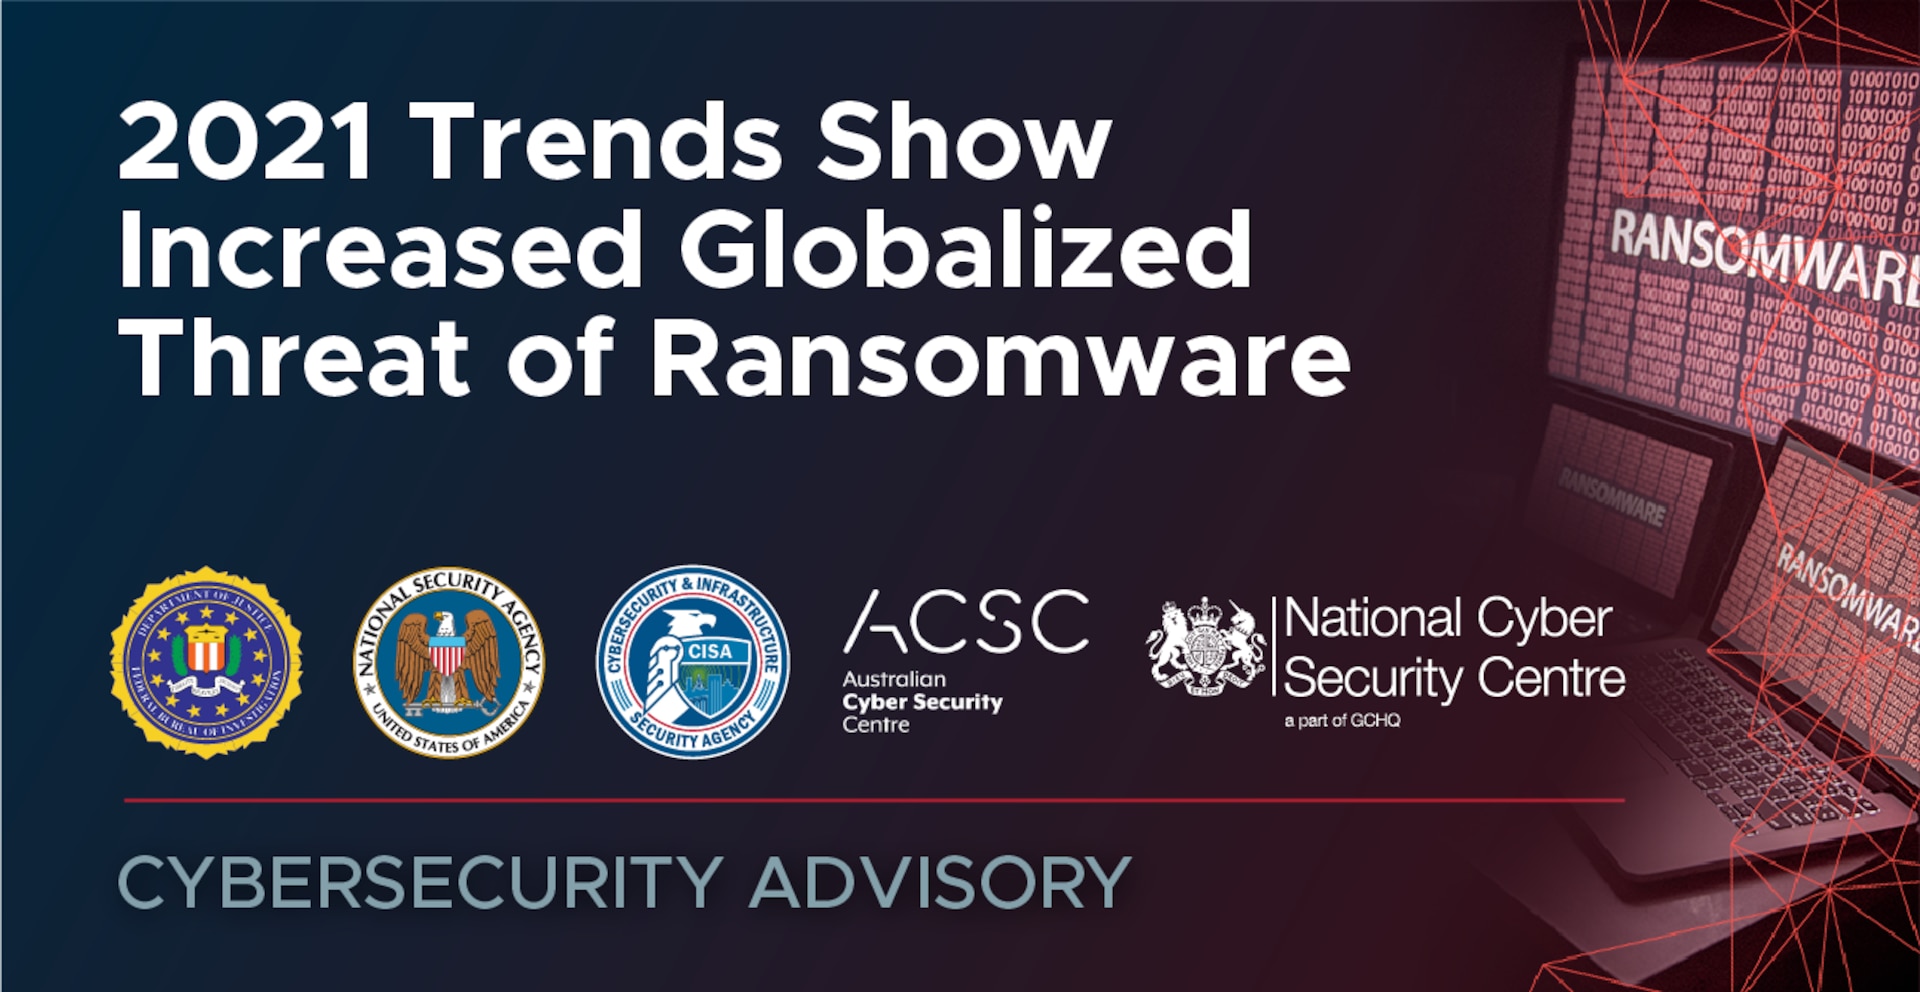 CISA, FBI, NSA and International Partners Issue Advisory on Ransomware Trends from 2021